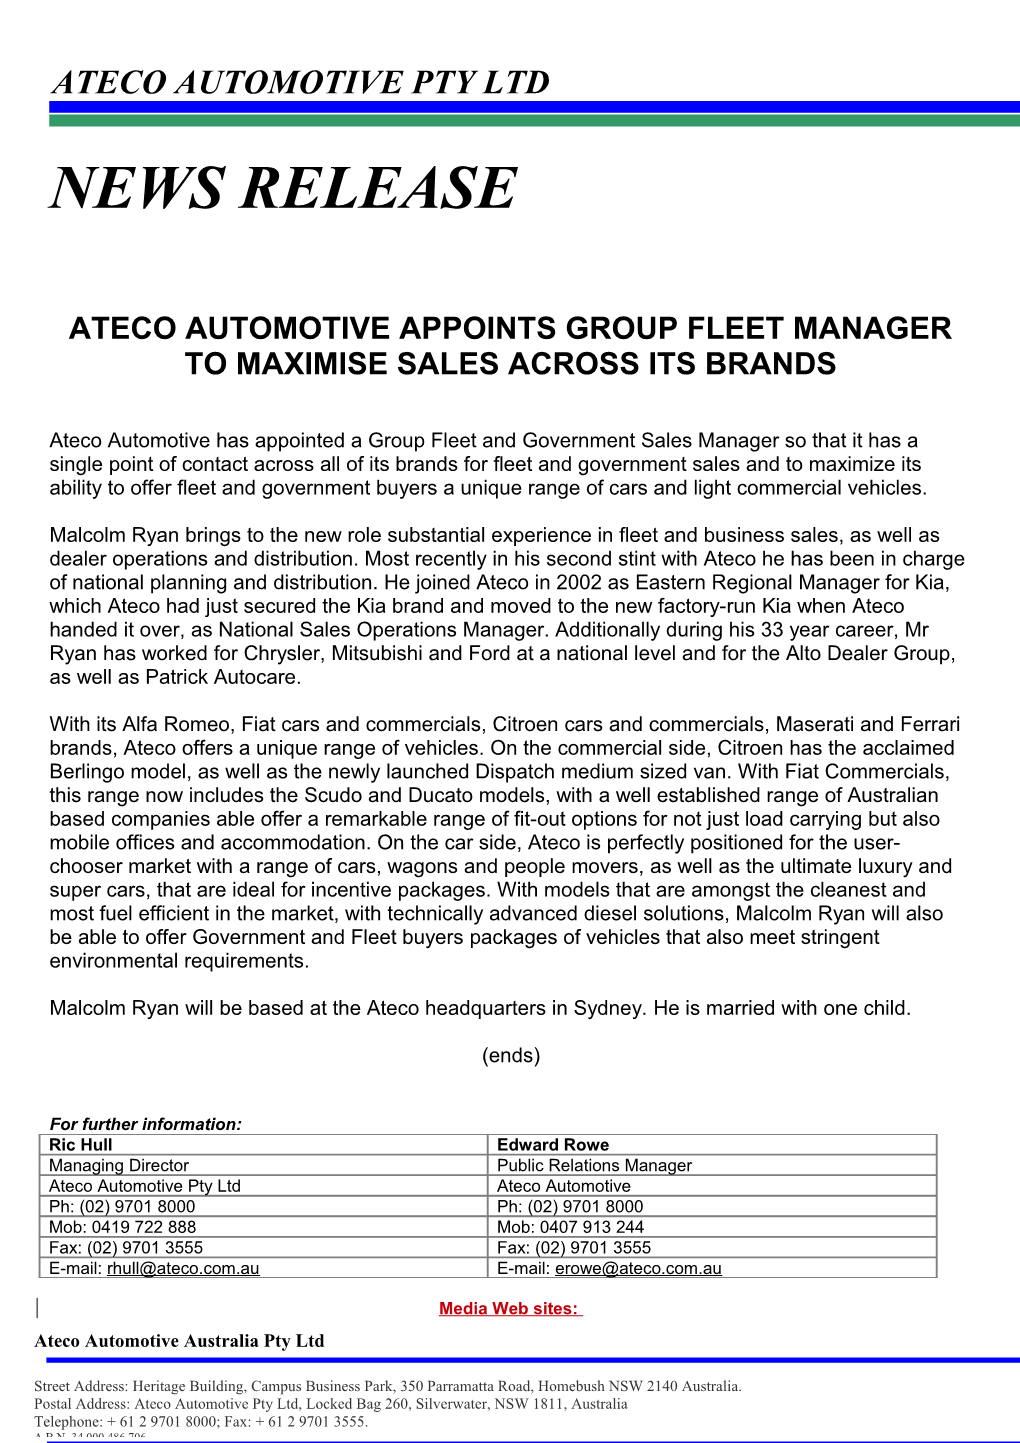 Ateco Automotive Appoints Group Fleet Manager to Maximise Sales Across Its Brands